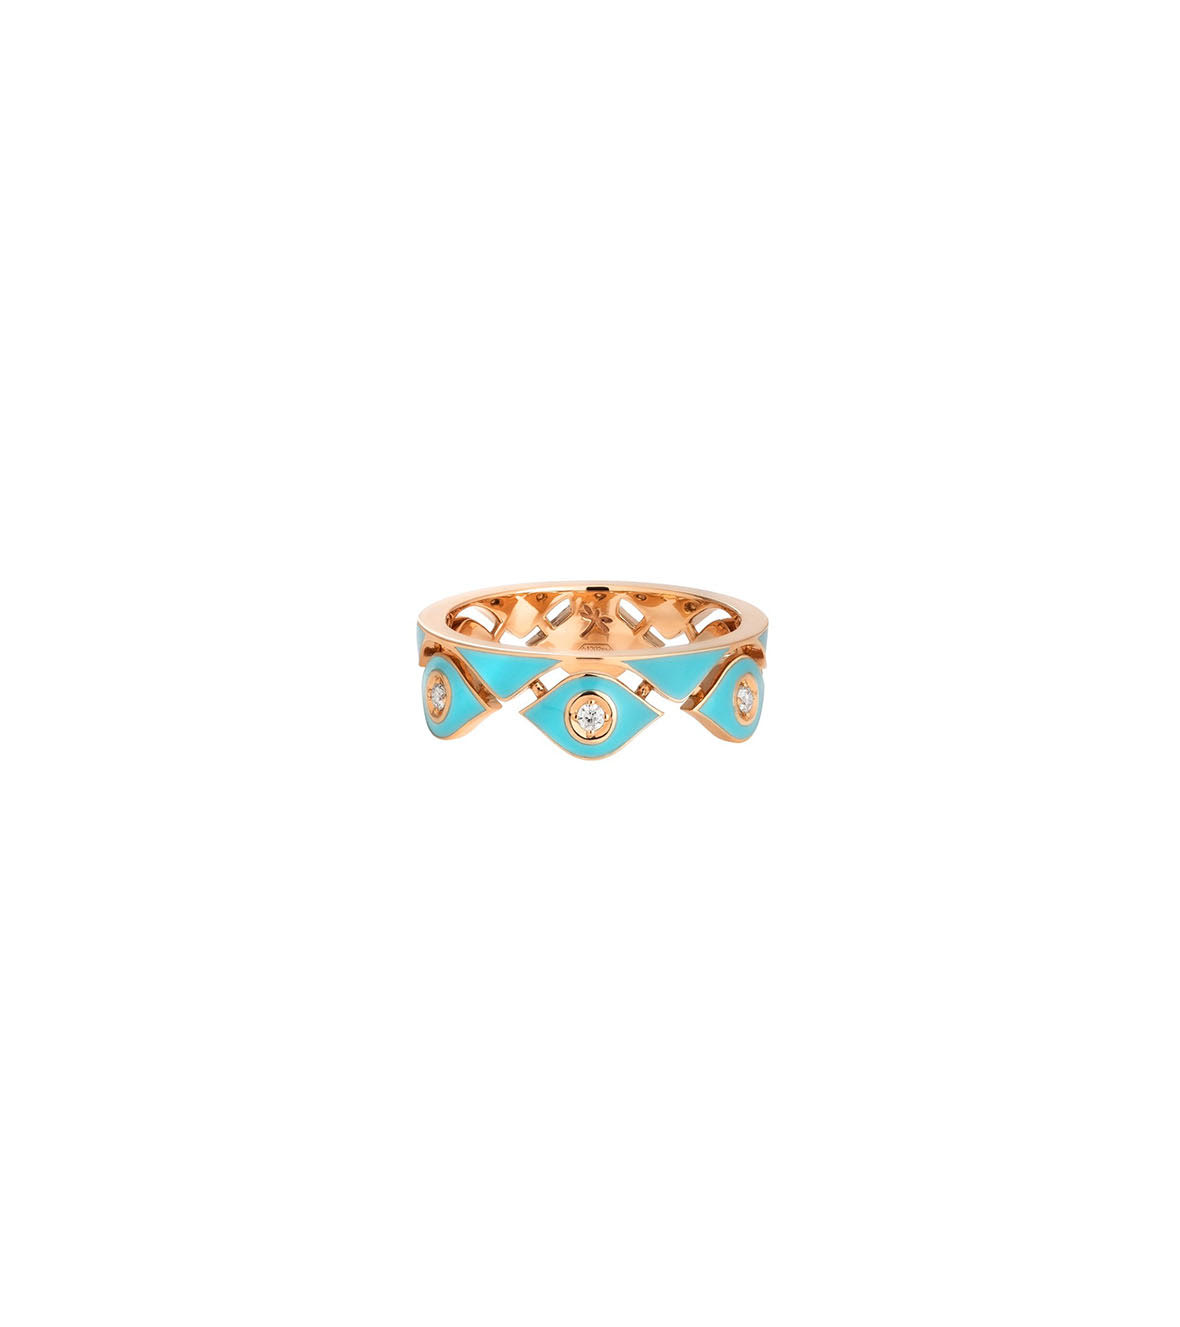 Yellow Gold Ring with Diamonds and Turquoise Enamel Casato